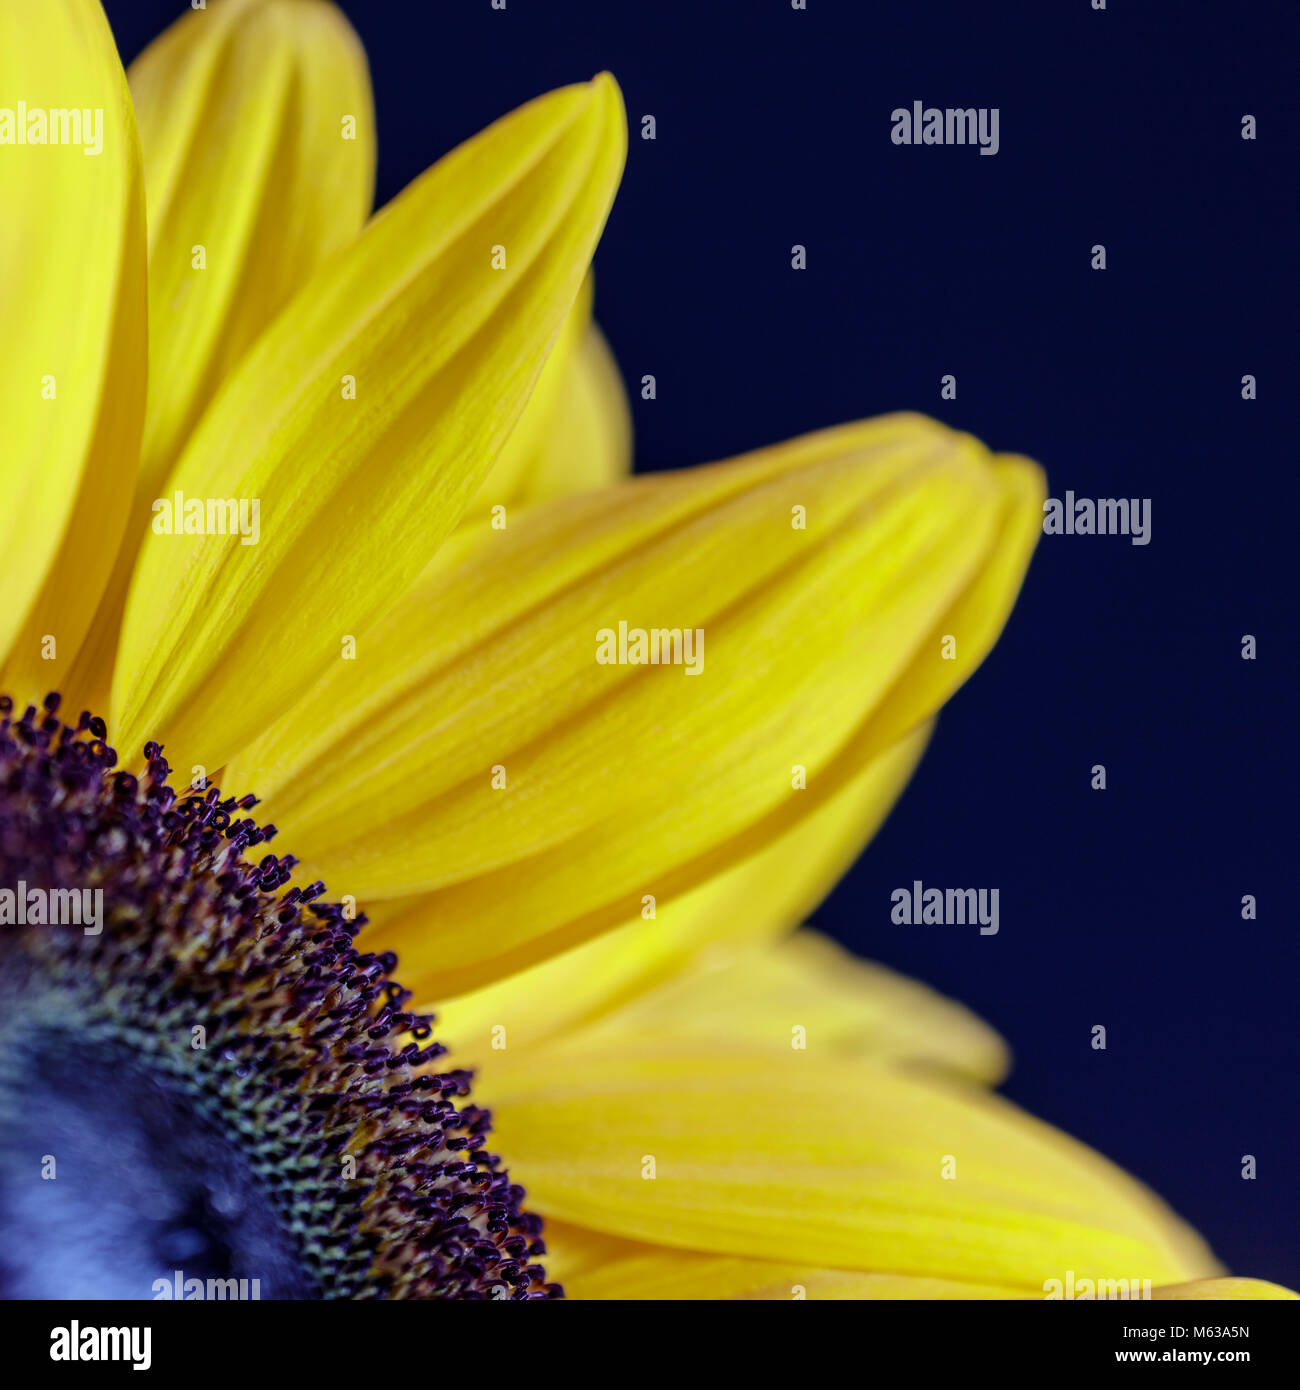 Close up of part of a sunflower against a blue background showing the contrast between the soft yellow petals and the harder florets in the middle. Stock Photo